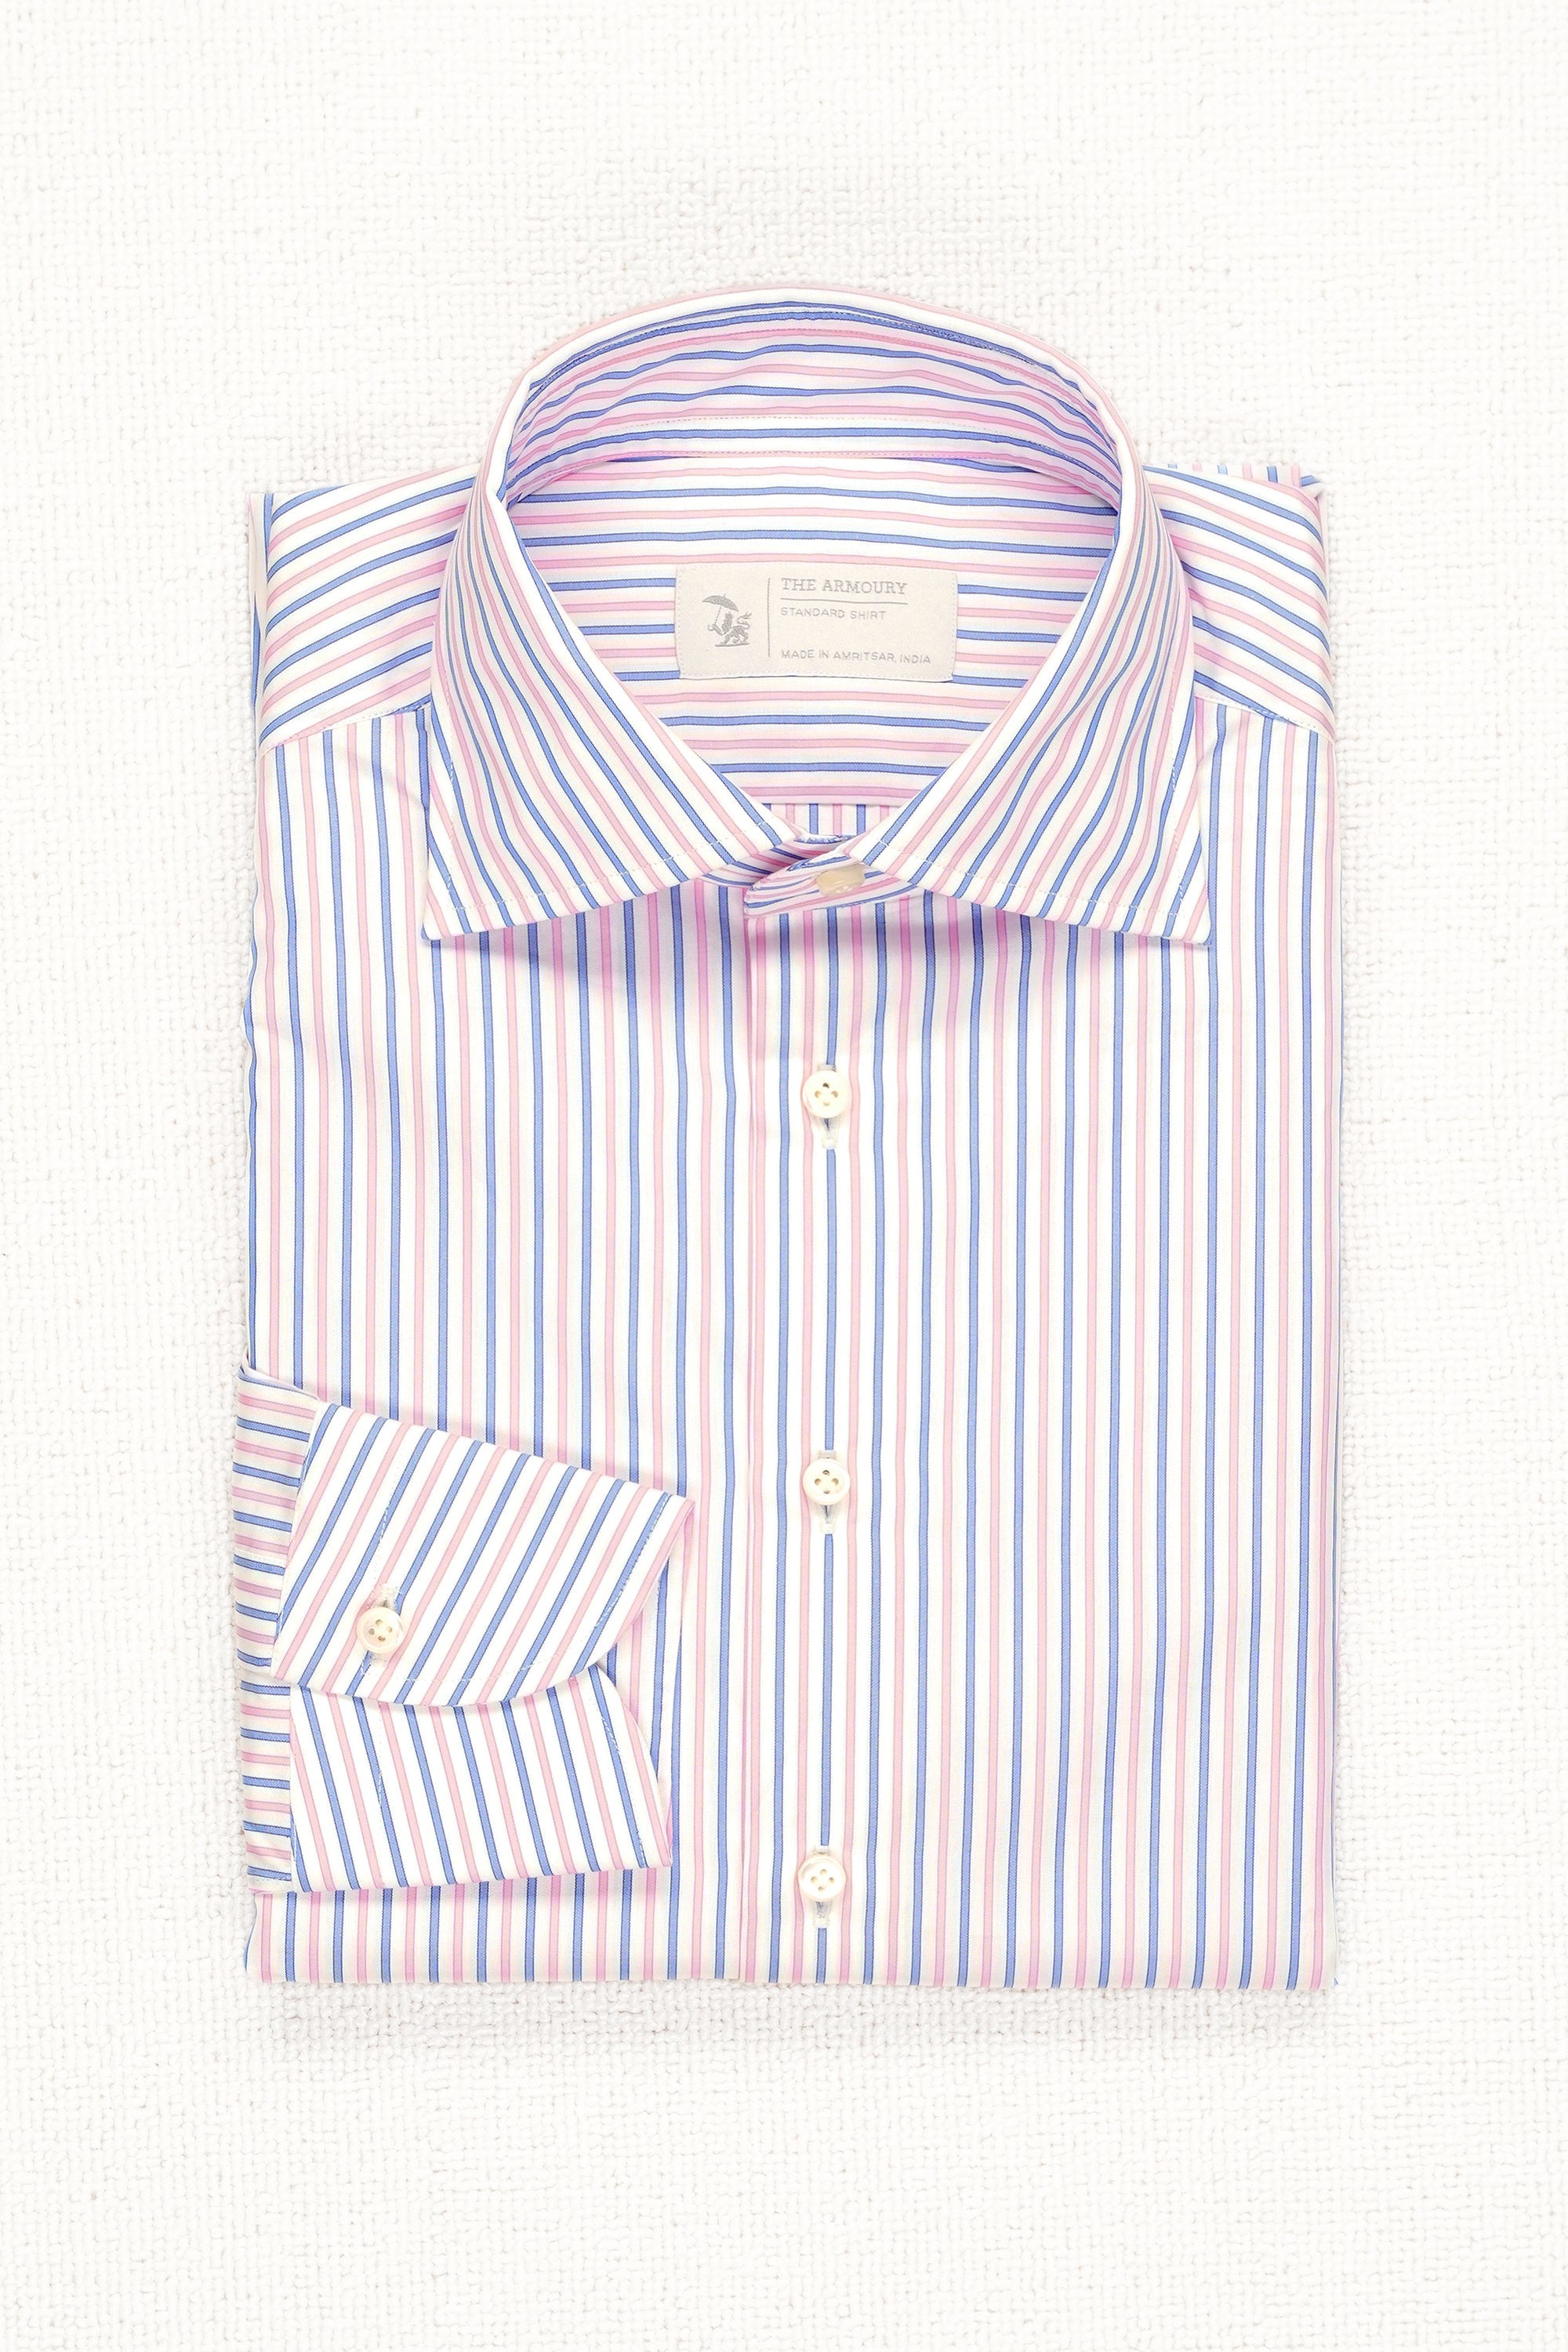 The Armoury by 100 Hands Pink/Blue Stripe Cotton Spread Collar Shirt MTM *sample*